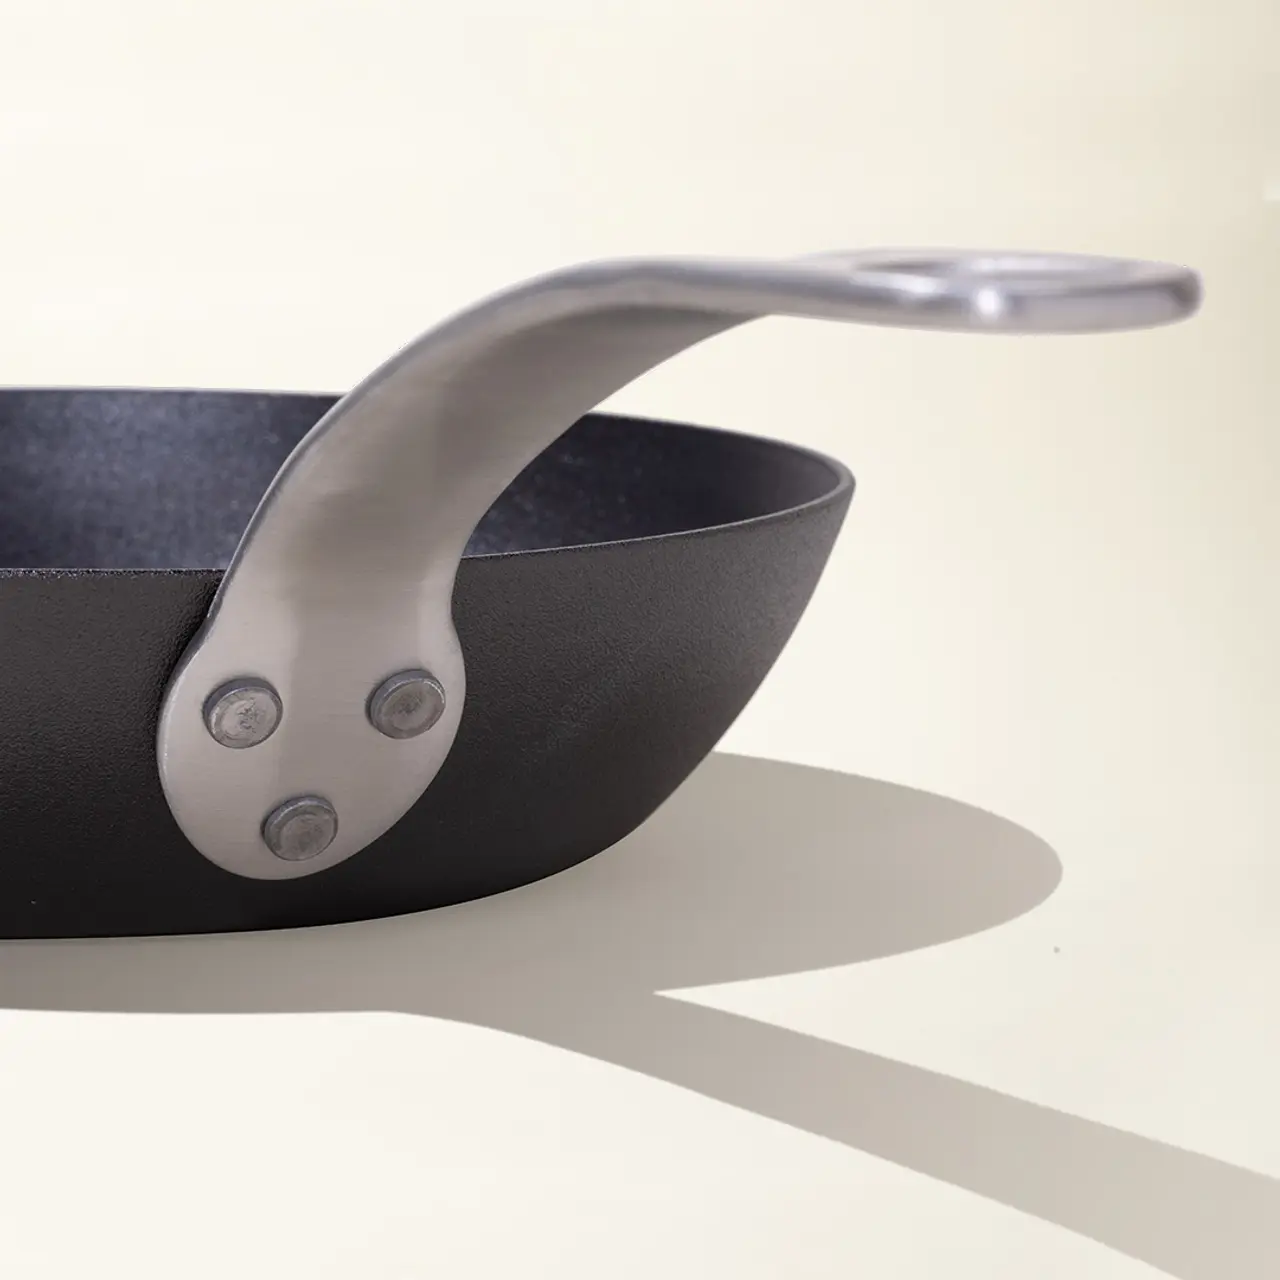 A close-up of a pan's handle, showing a sleek metal design with rivet details and a soft shadow cast on a light background.